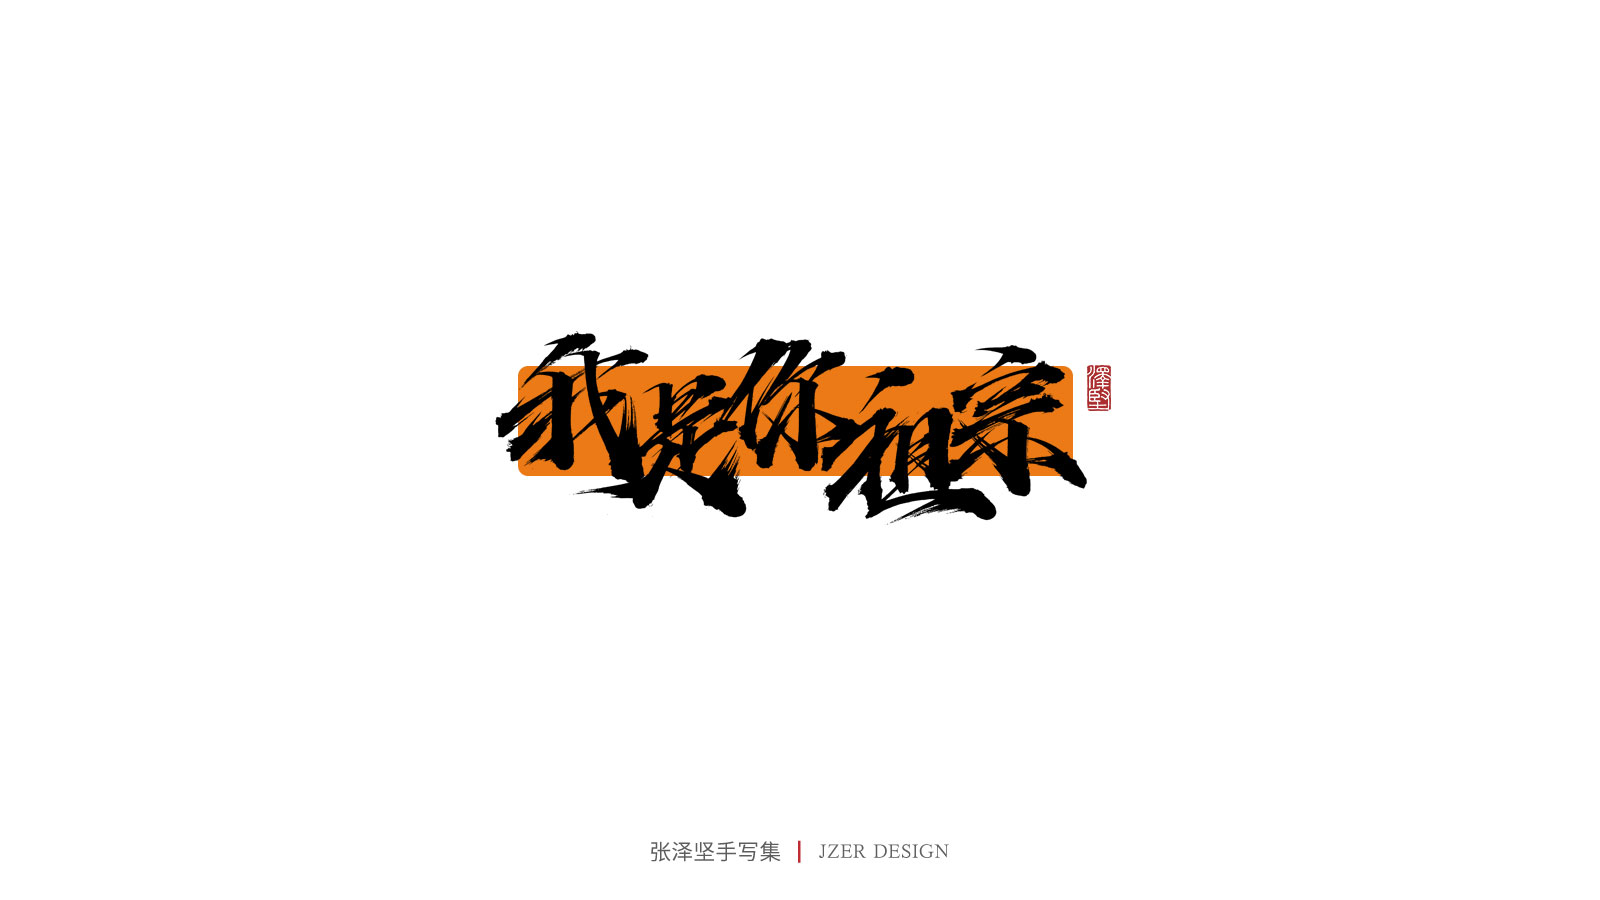 20P Collection of the latest Chinese font design schemes in 2021 #.636